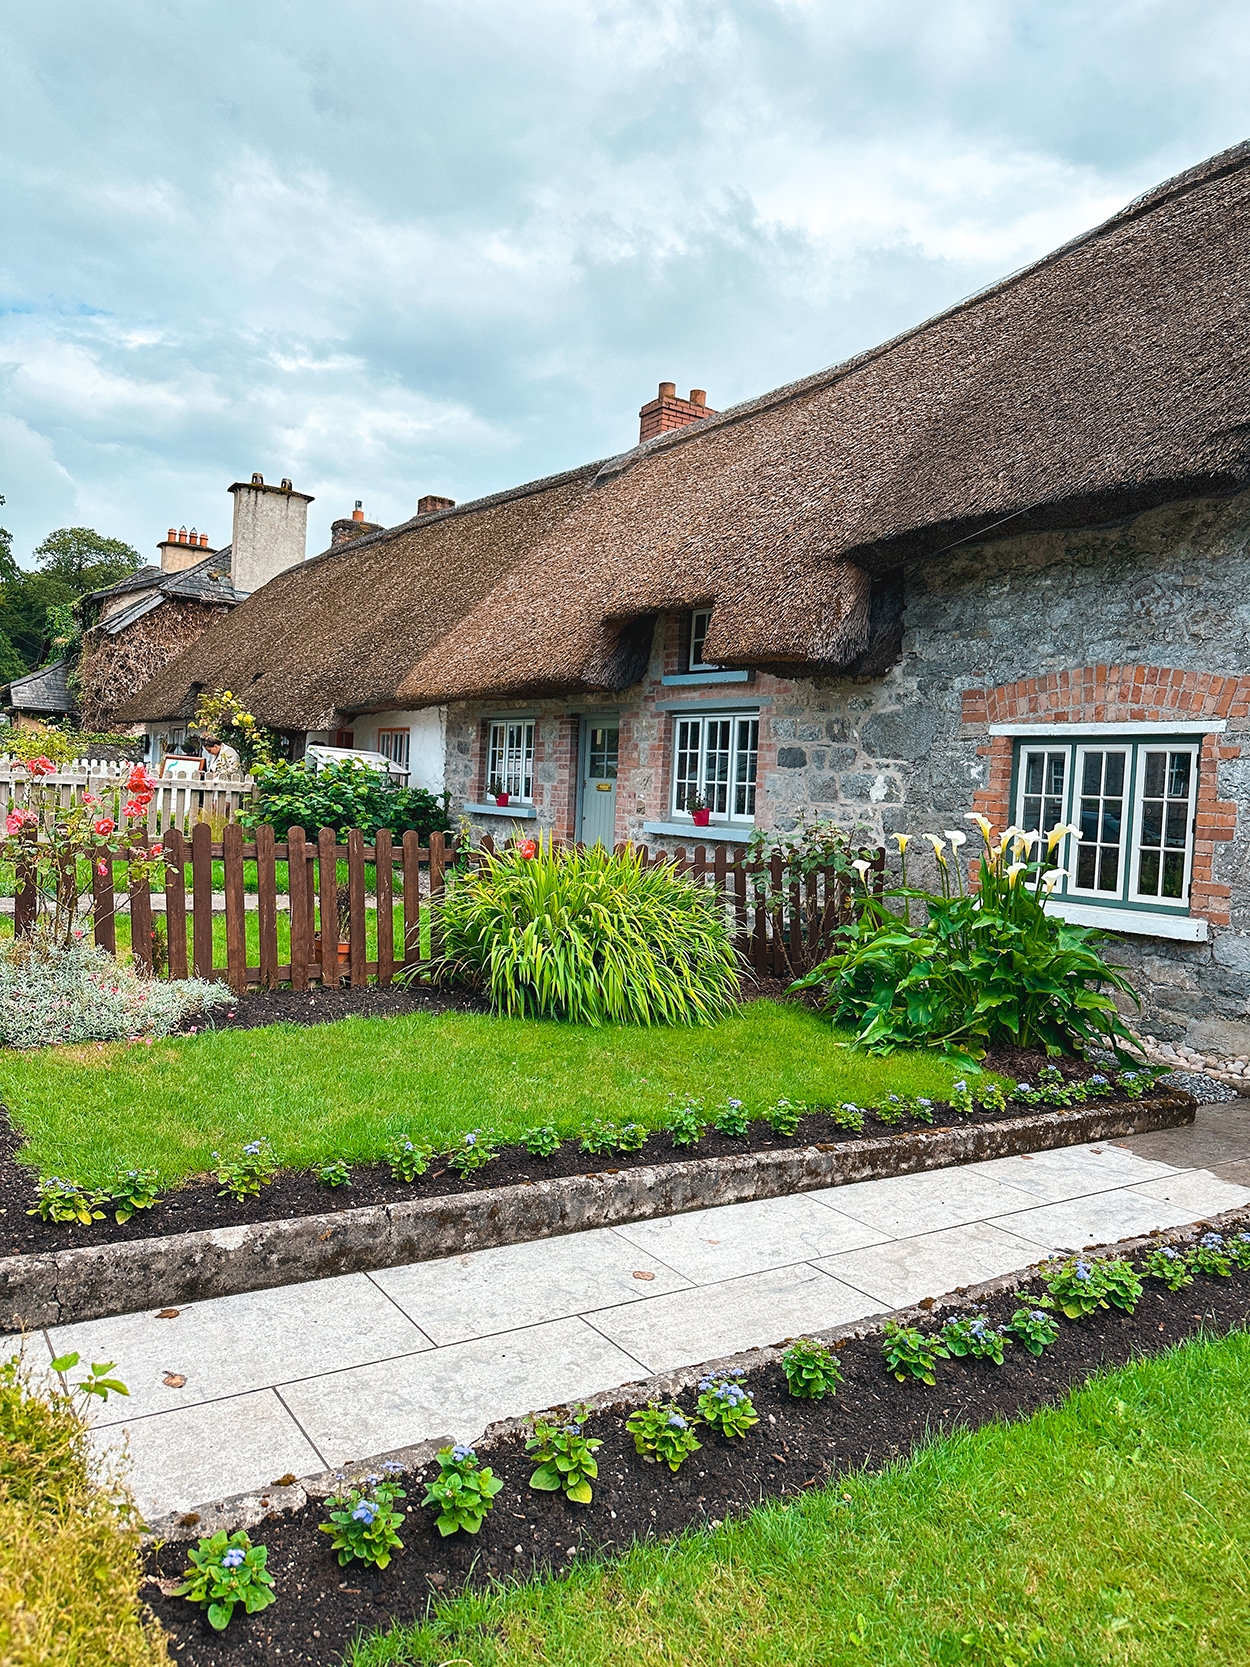 Adare Thatched Cottages